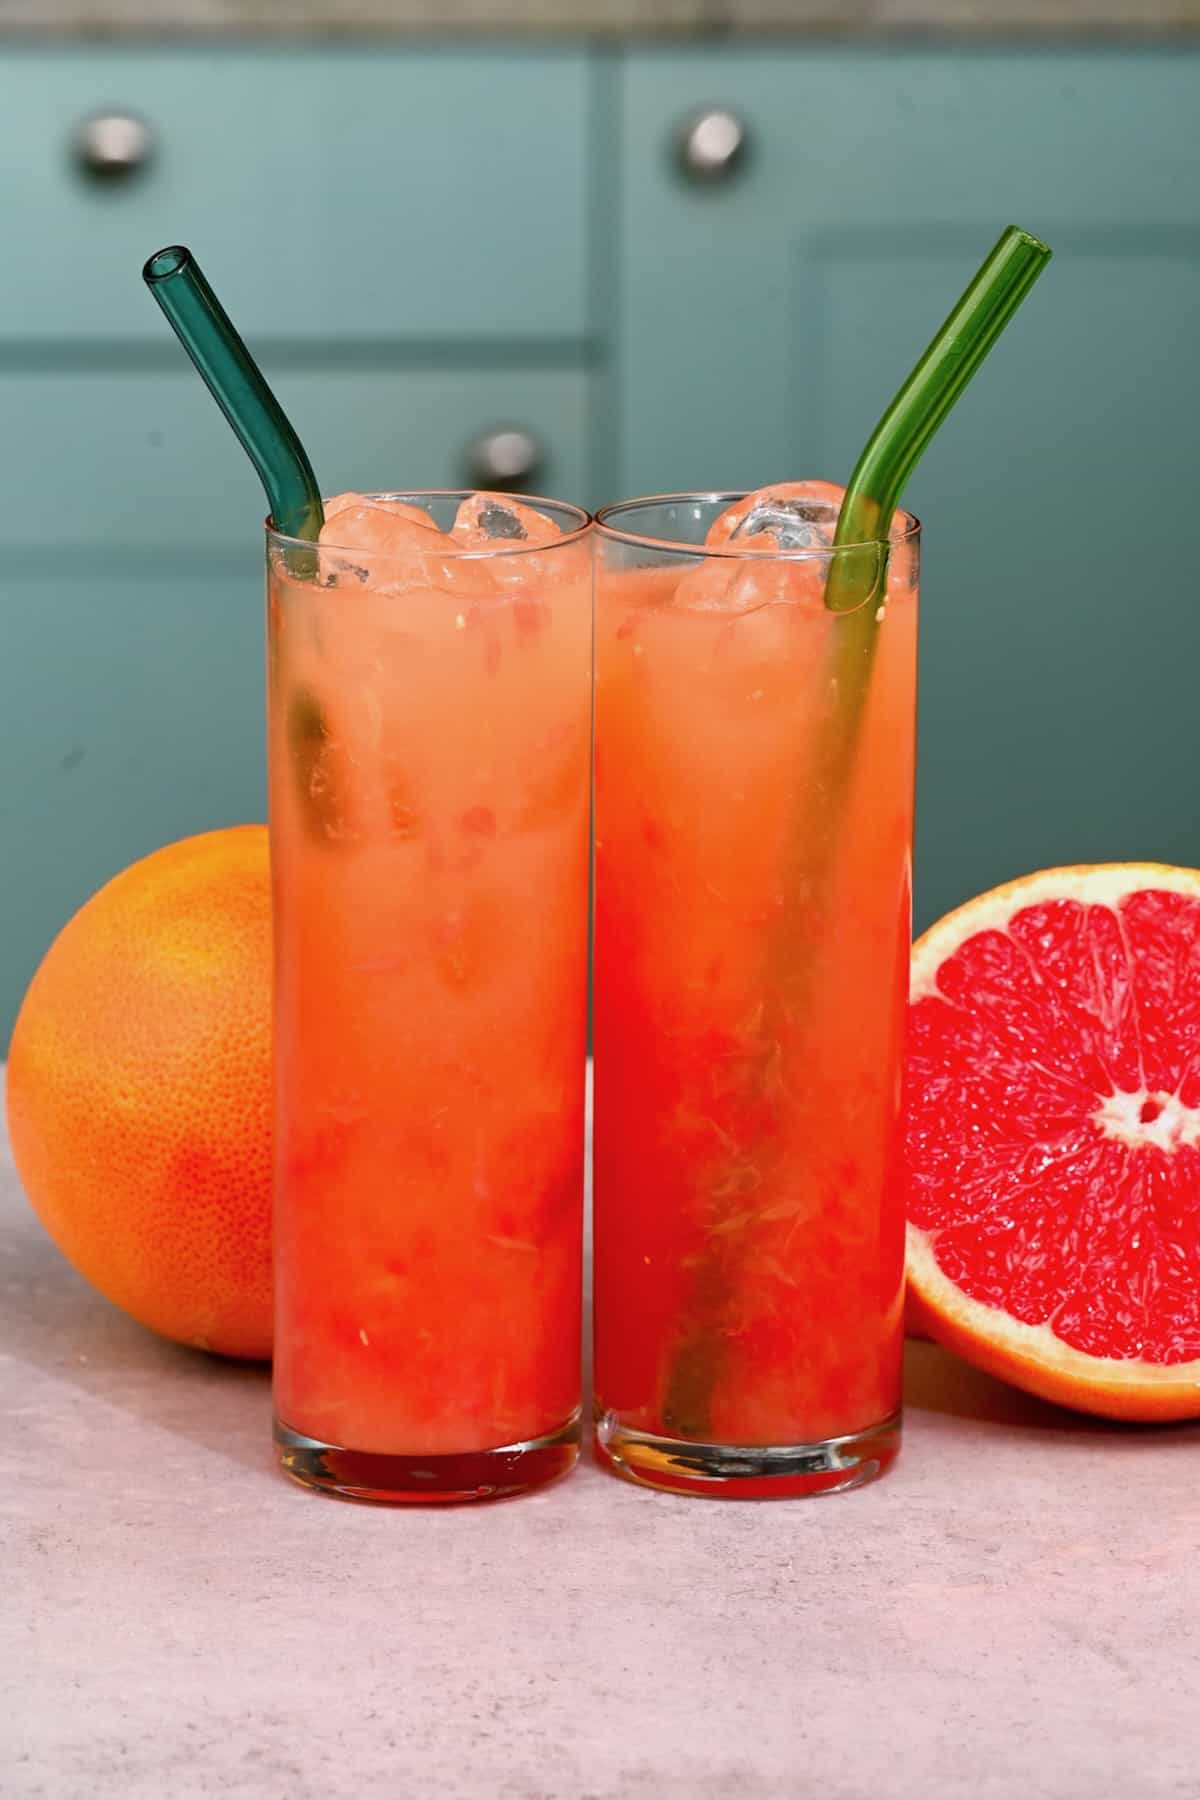 Two glasses with grapefruit juice and ice